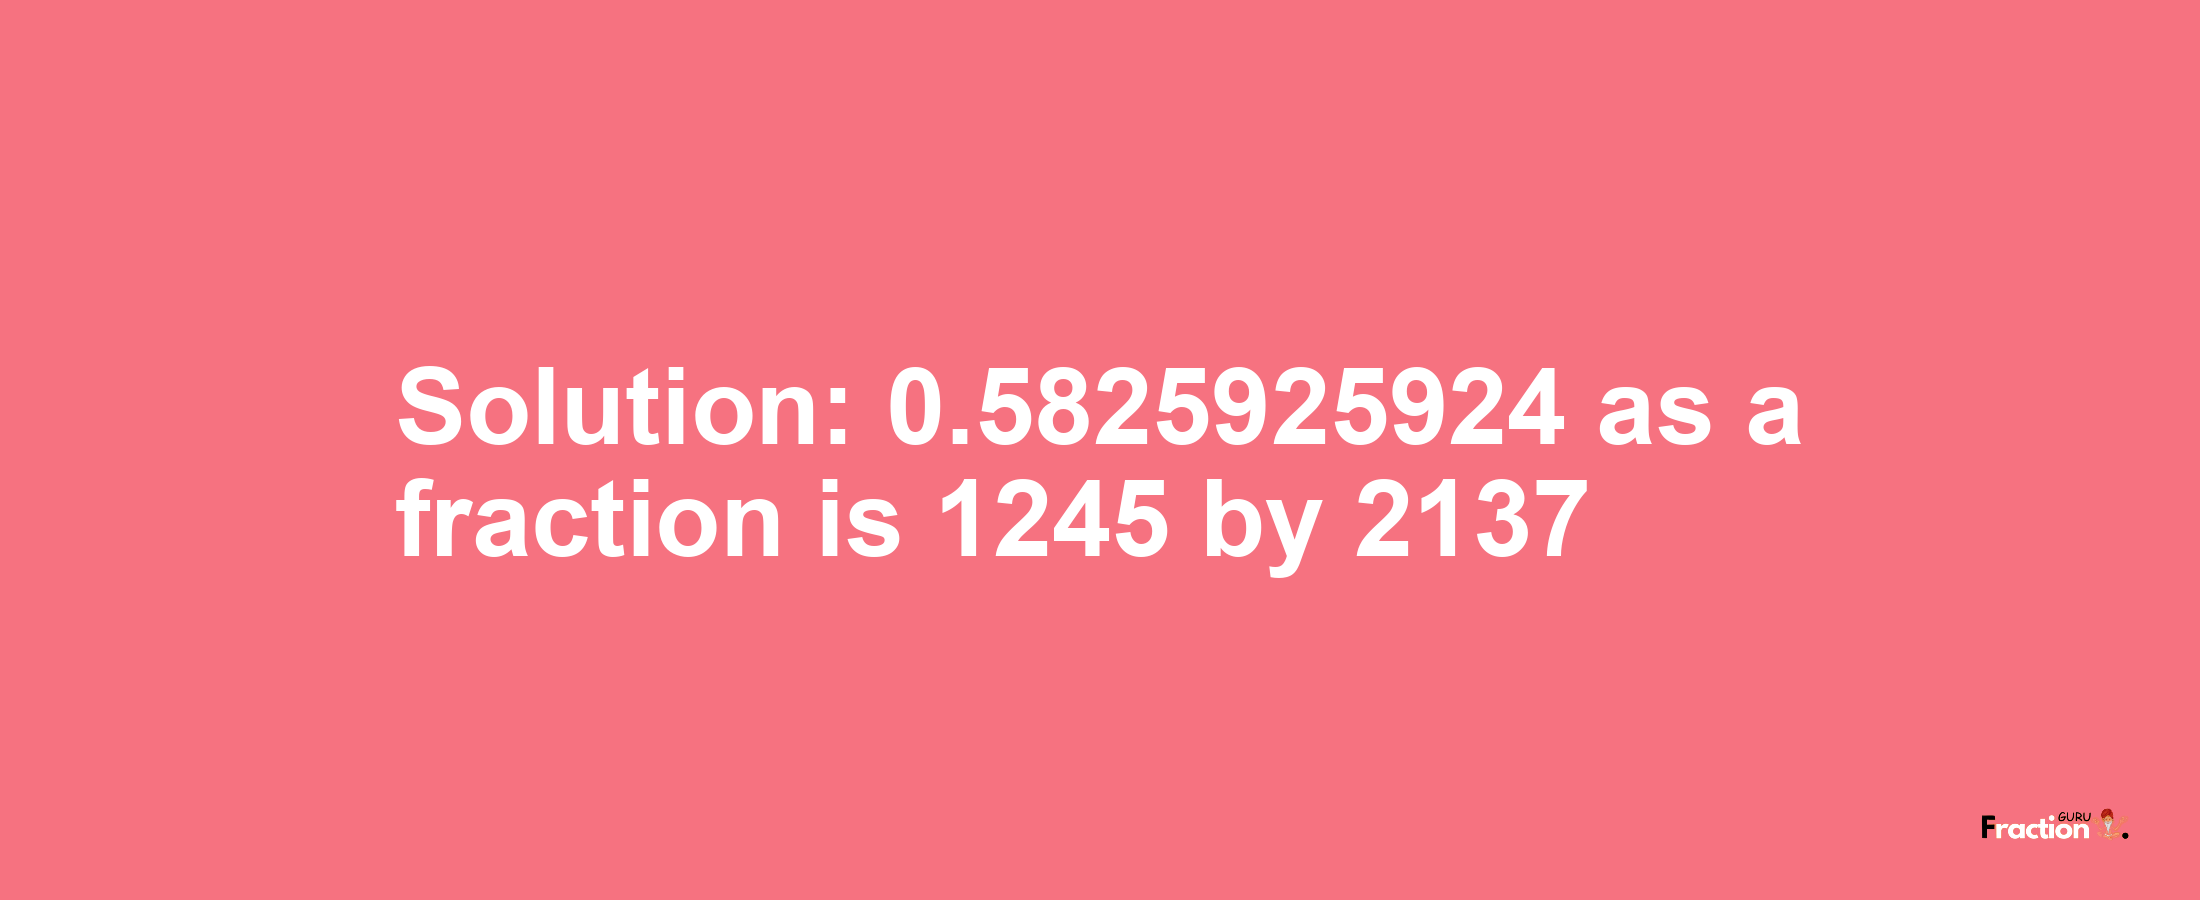 Solution:0.5825925924 as a fraction is 1245/2137